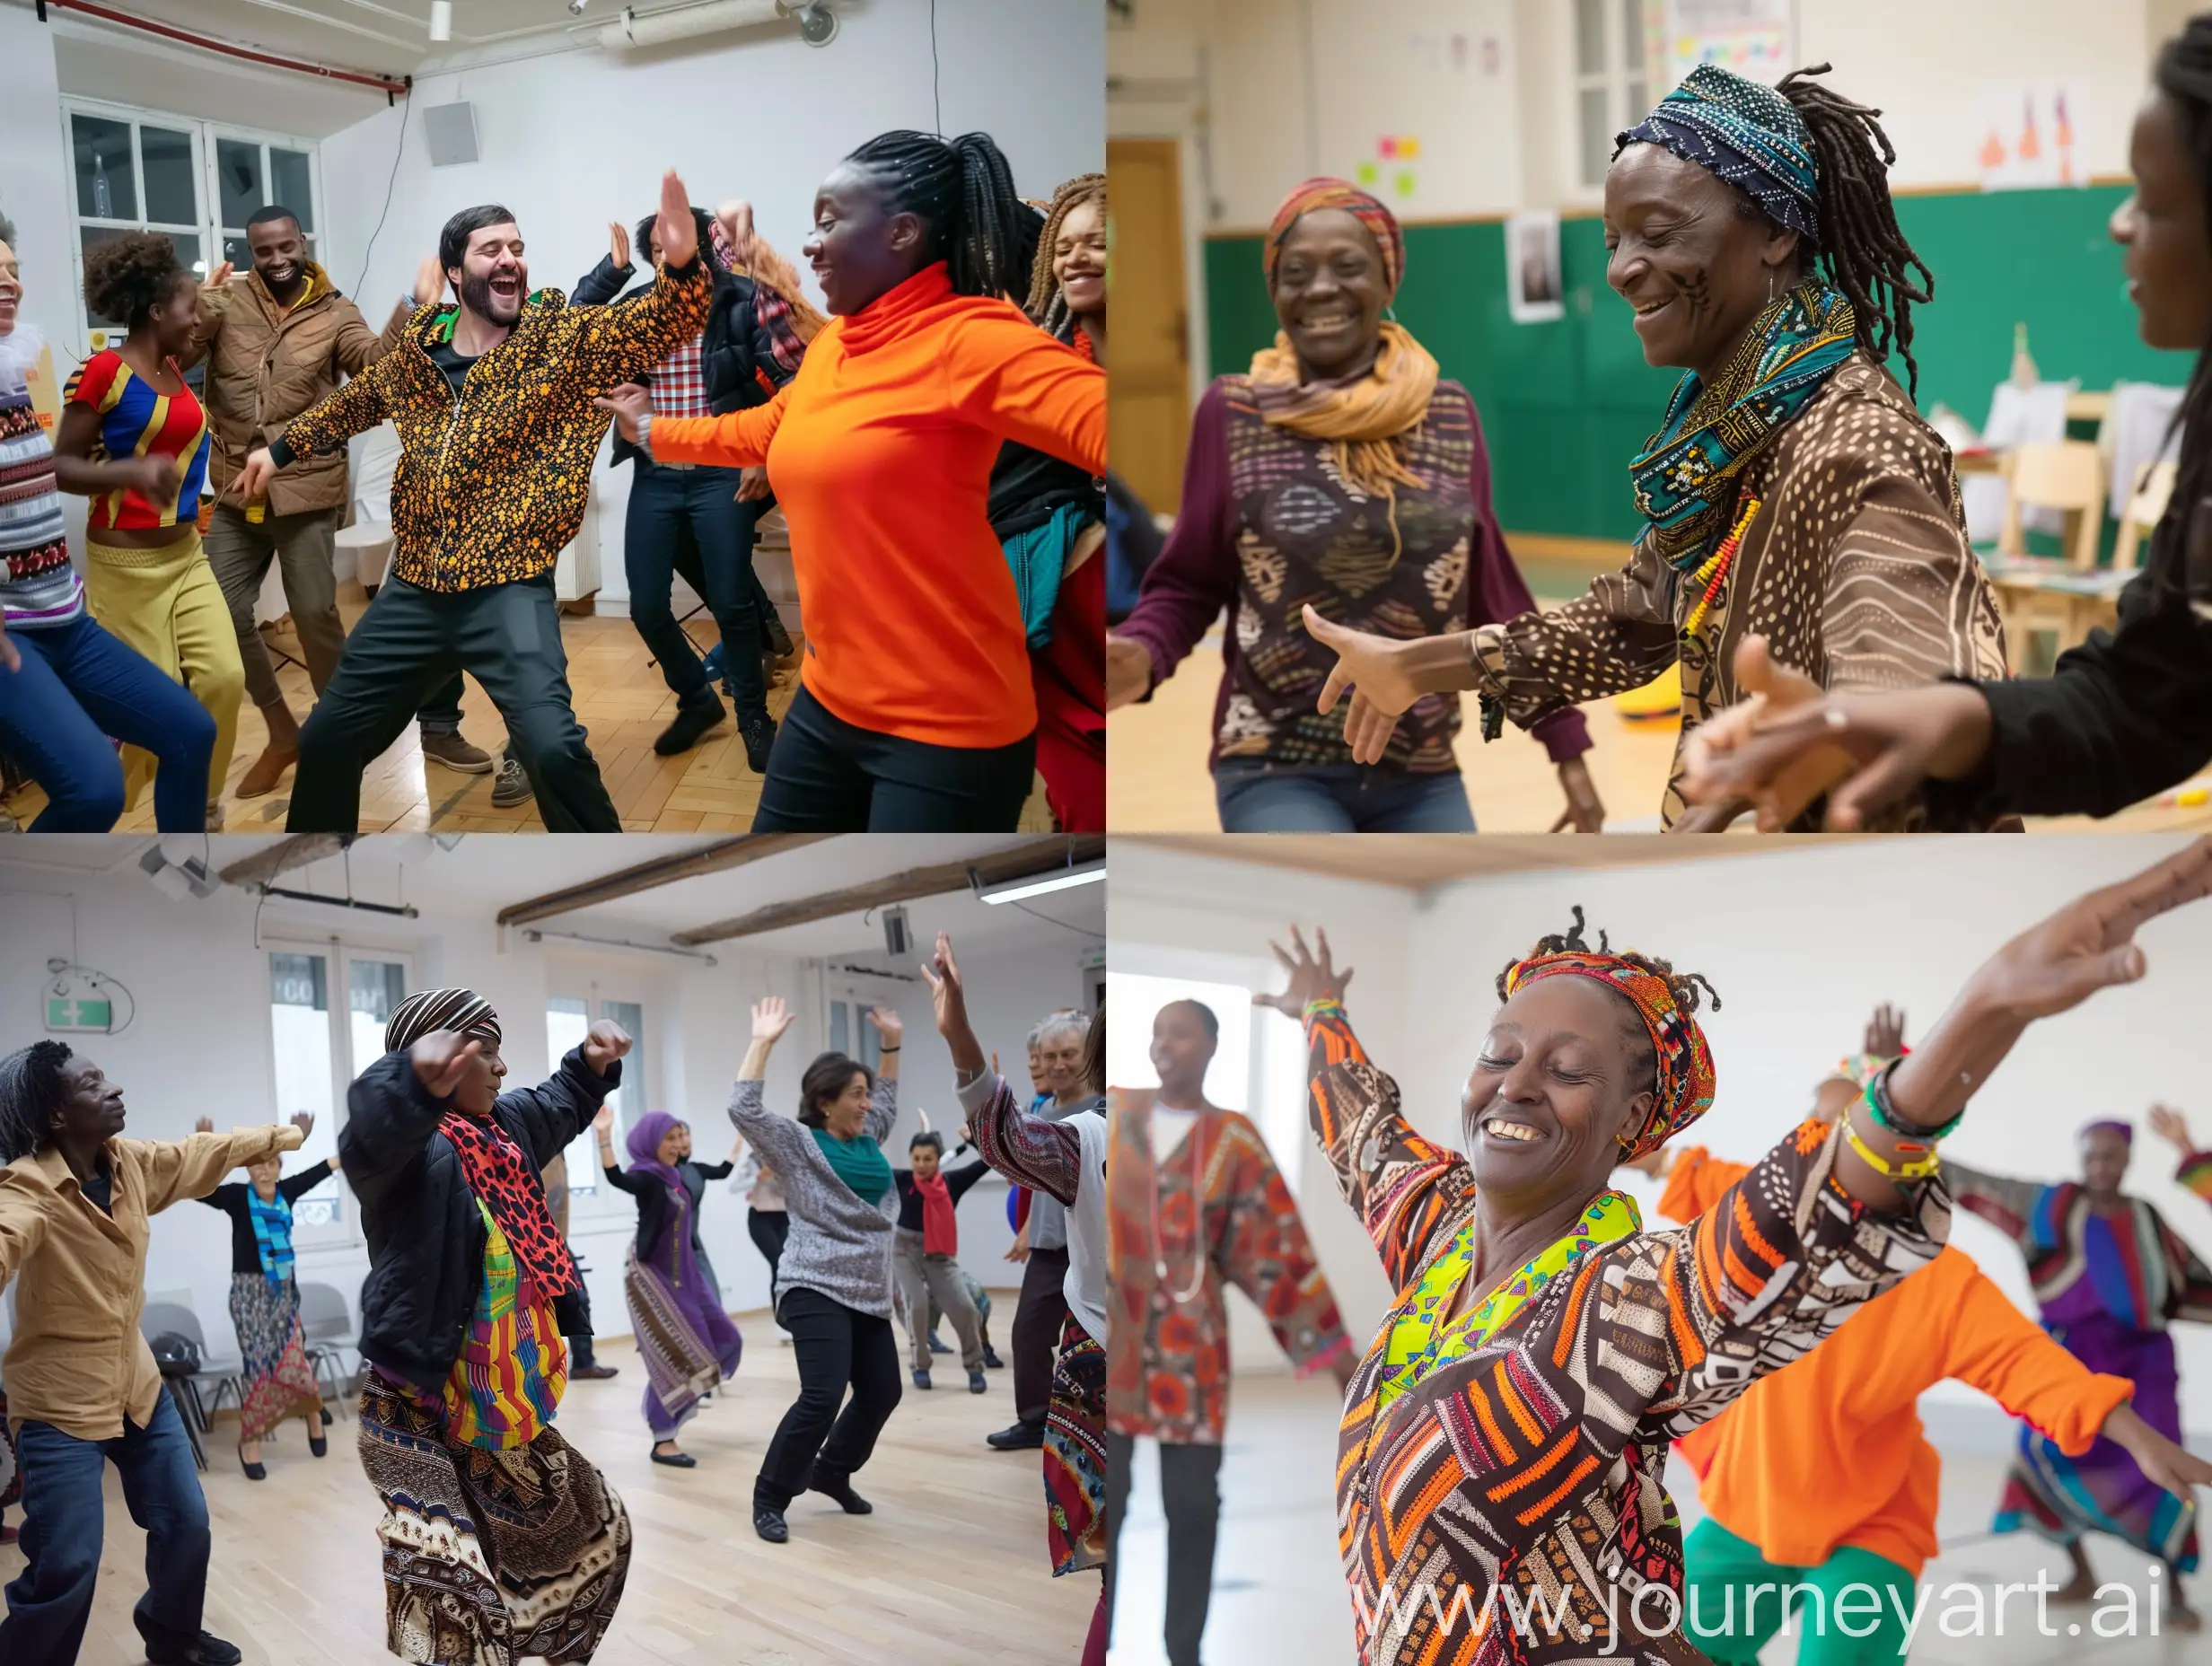 people from diferent etnicities in a workshop for social inclusion and preserve cultural diversity in Paris by engaging local communities via Dancing tradicions.